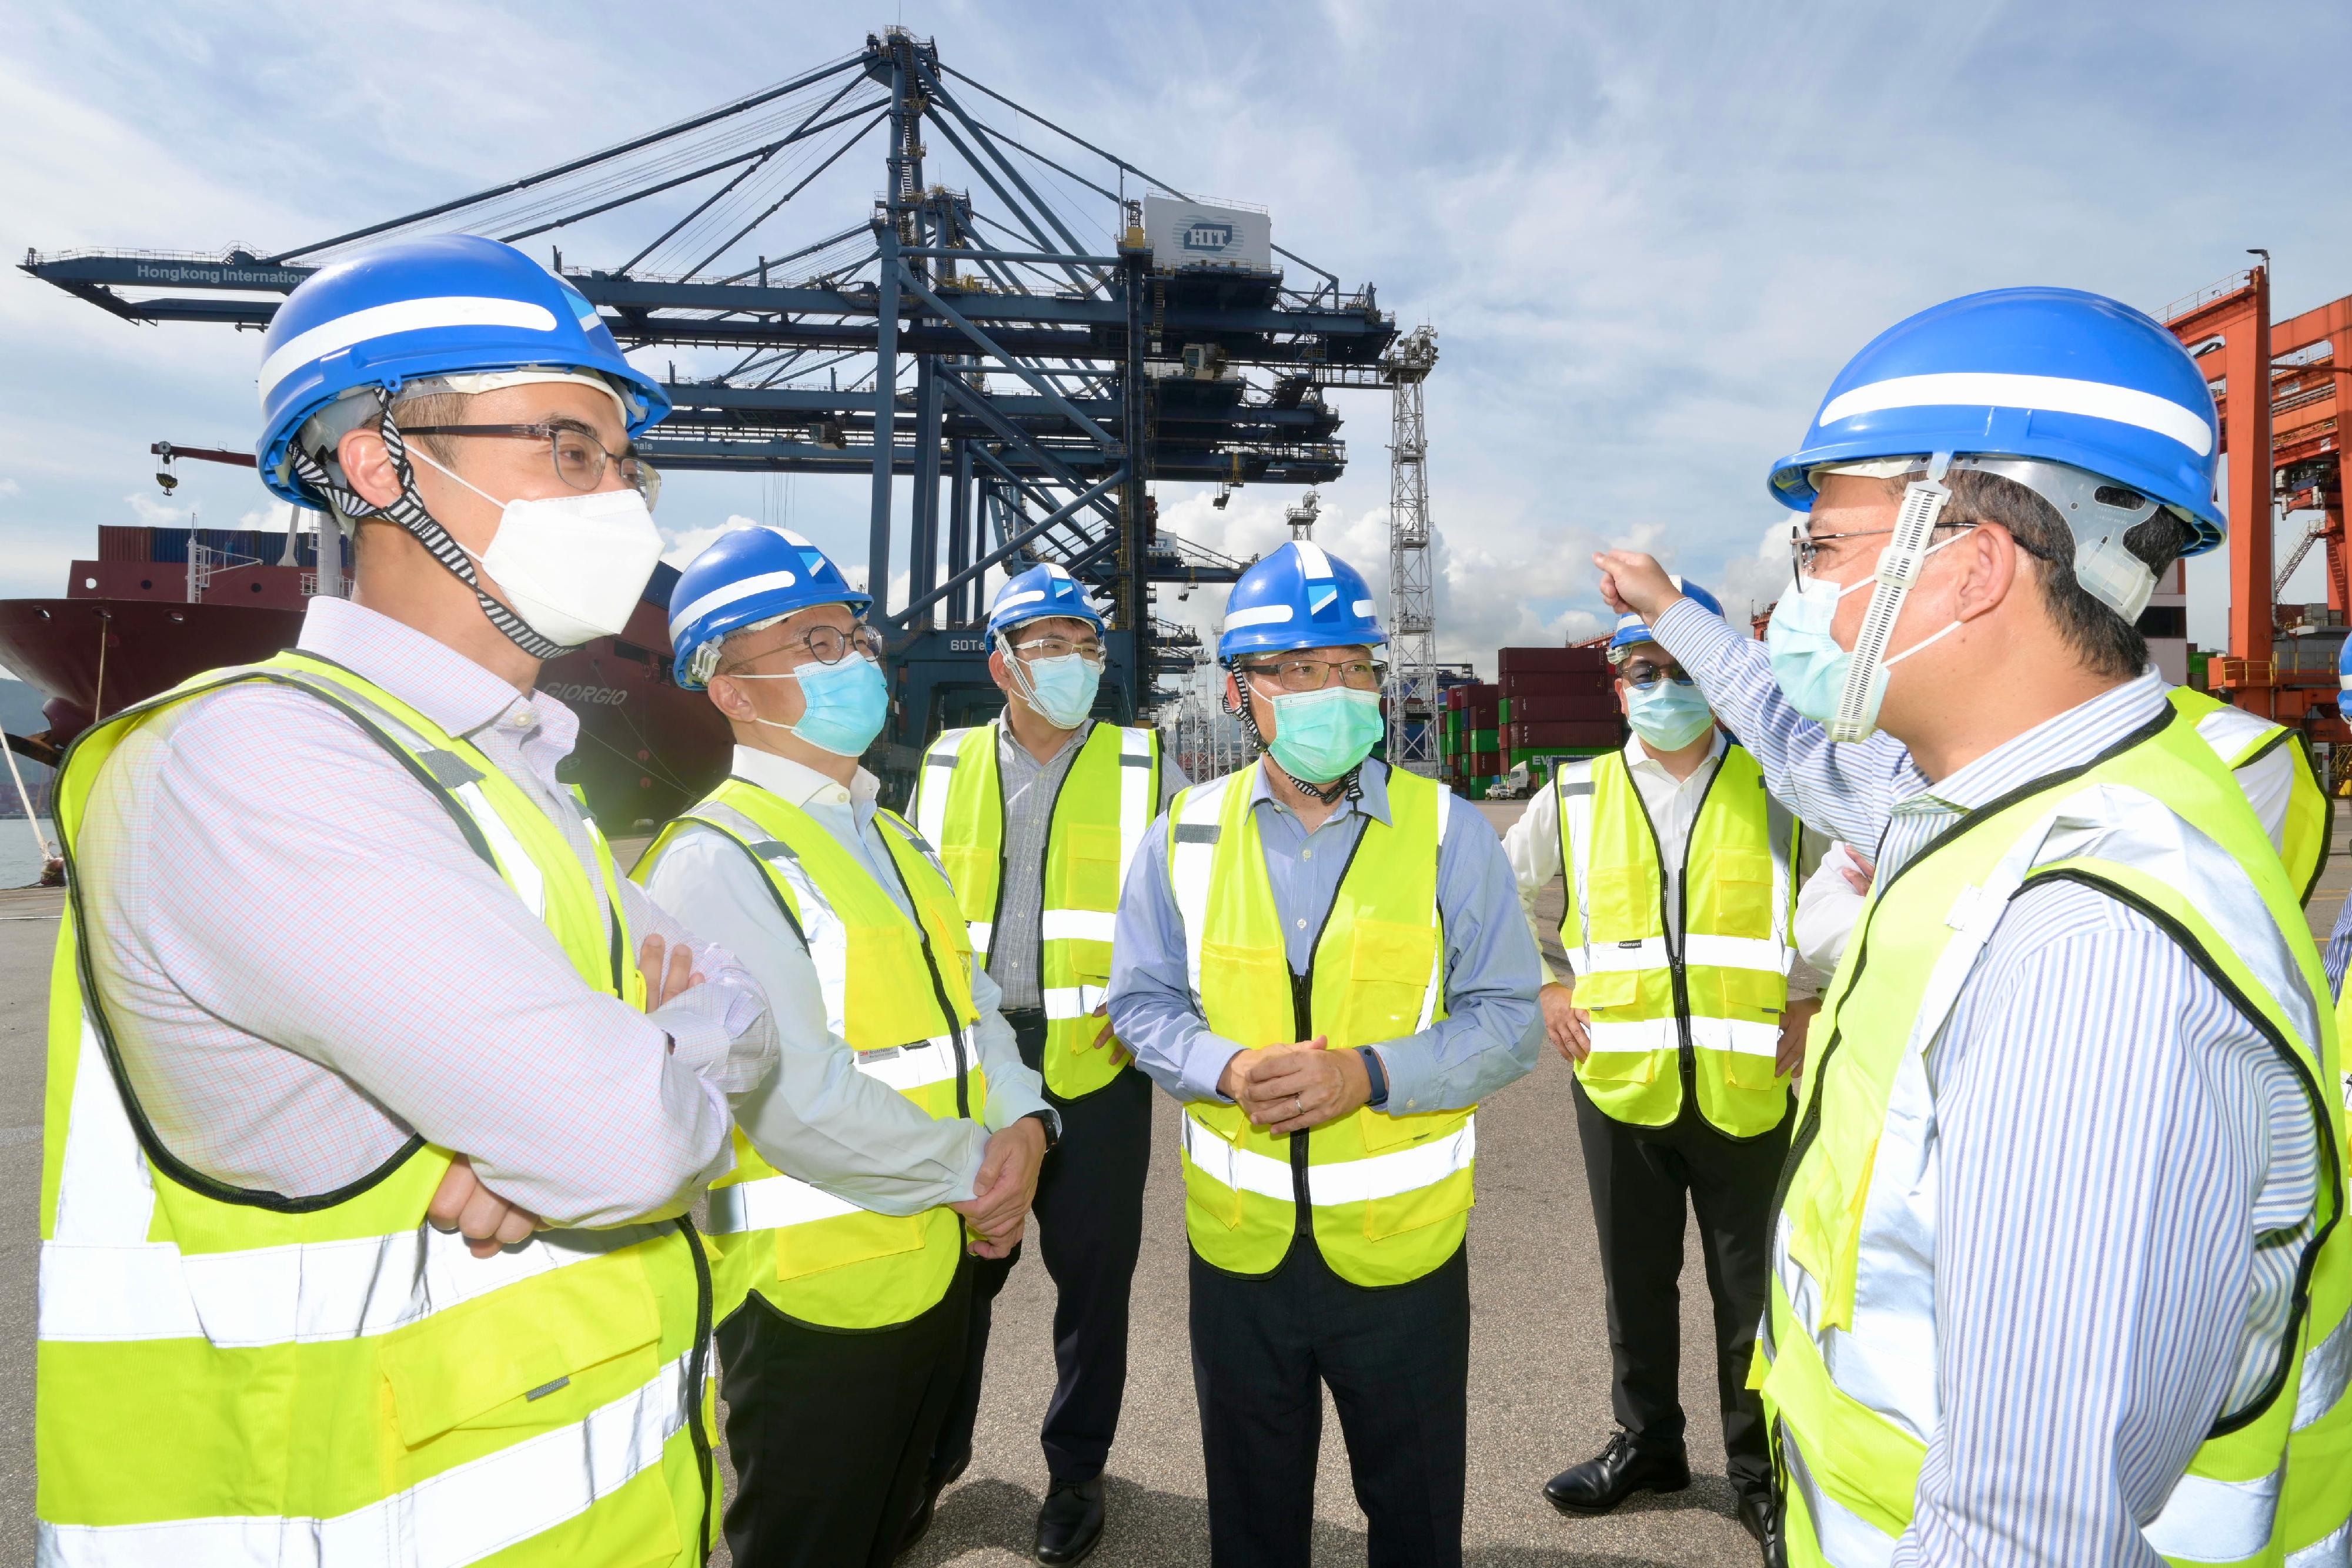 The Secretary for Transport and Logistics, Mr Lam Sai-hung (fourth left), visits the container yard at the Kwai Tsing Container Terminals today (July 19).